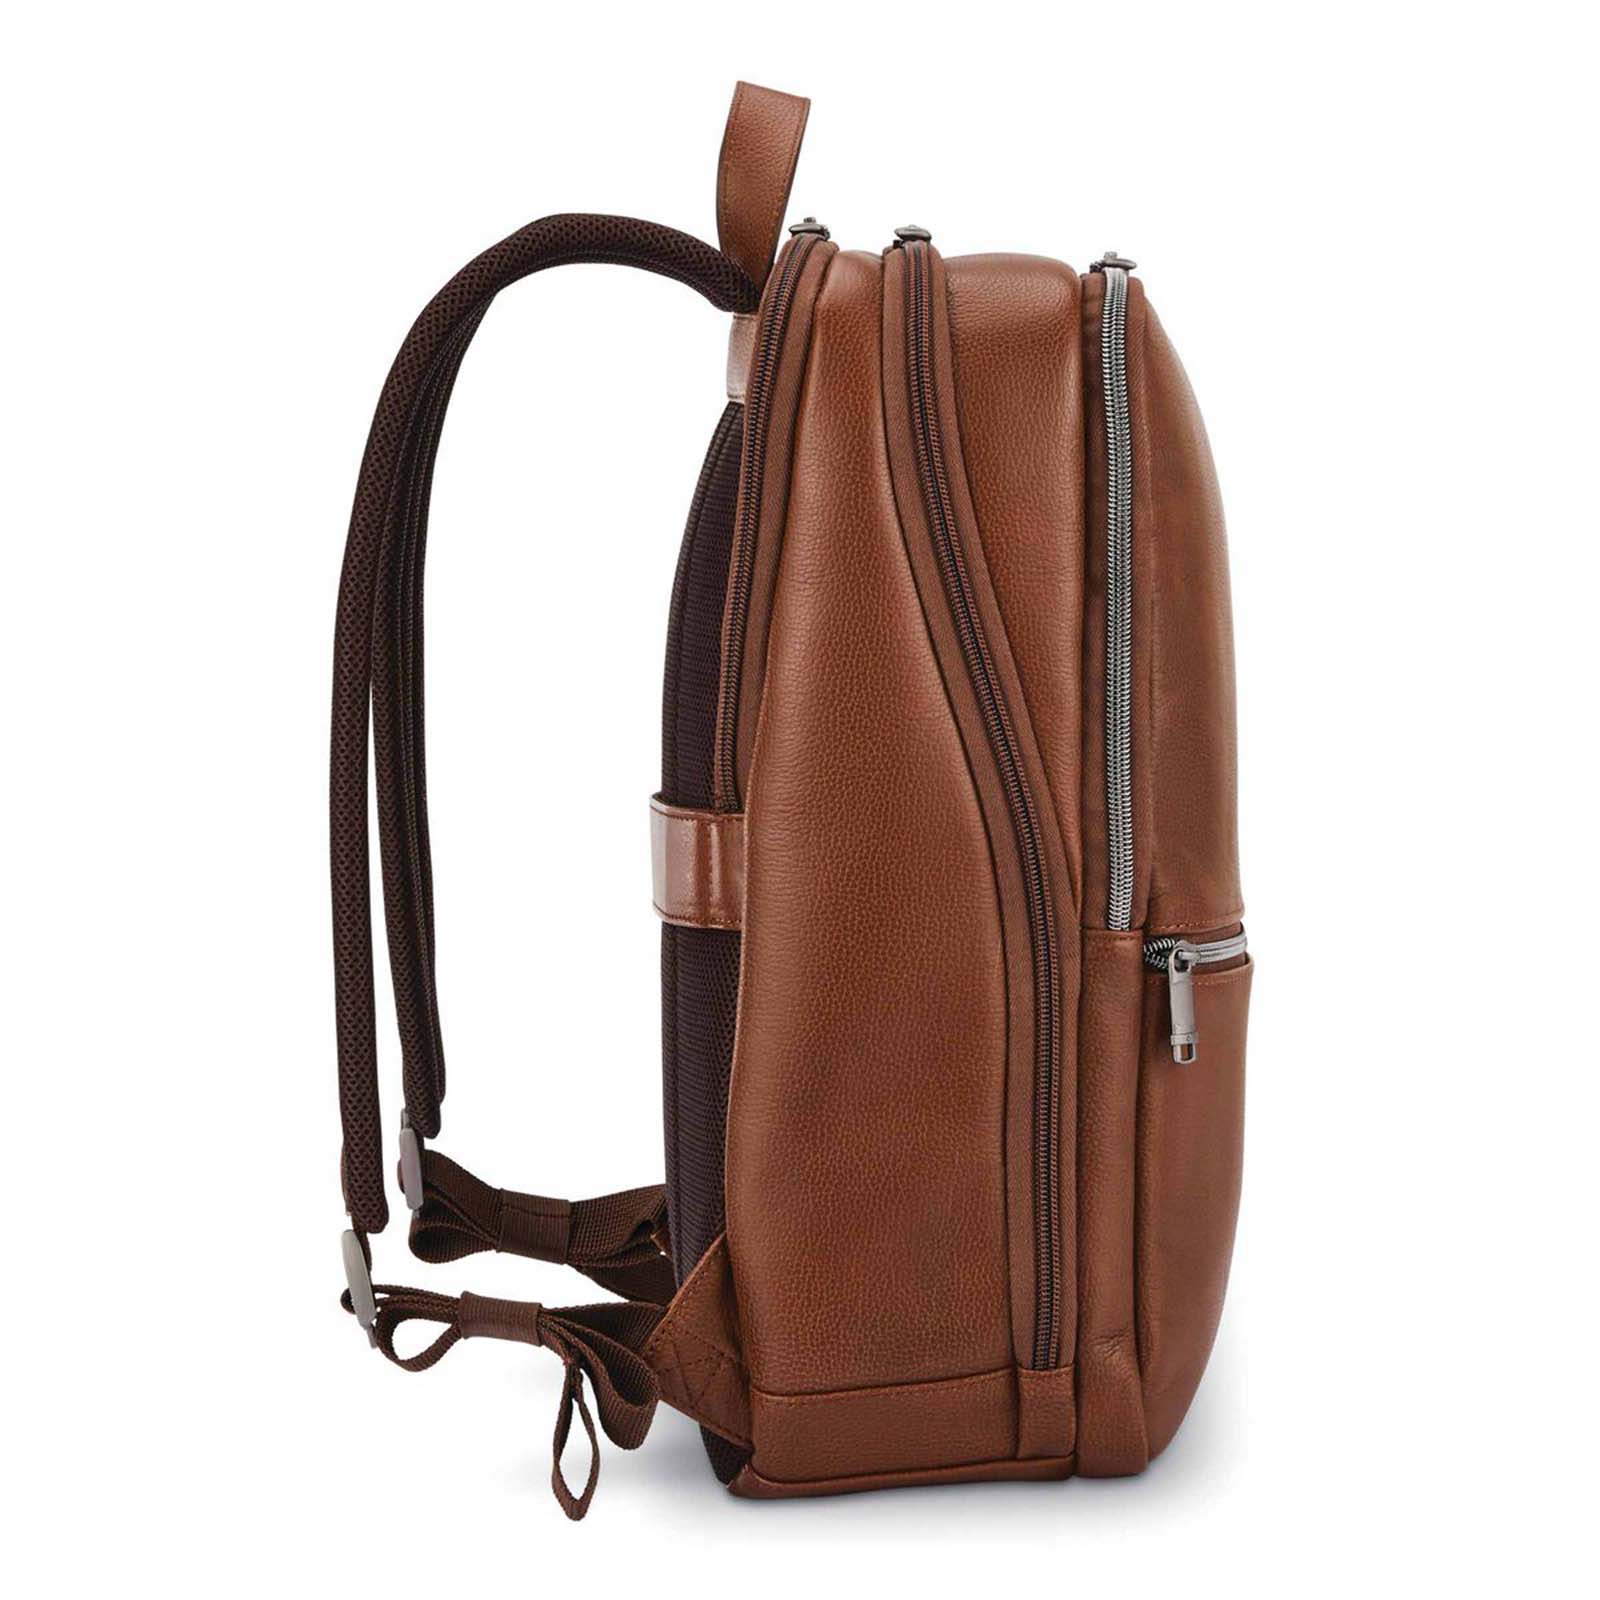 Samsonite-Classic-Leather-14-Inch-Laptop-Backpack-Cognac-Side